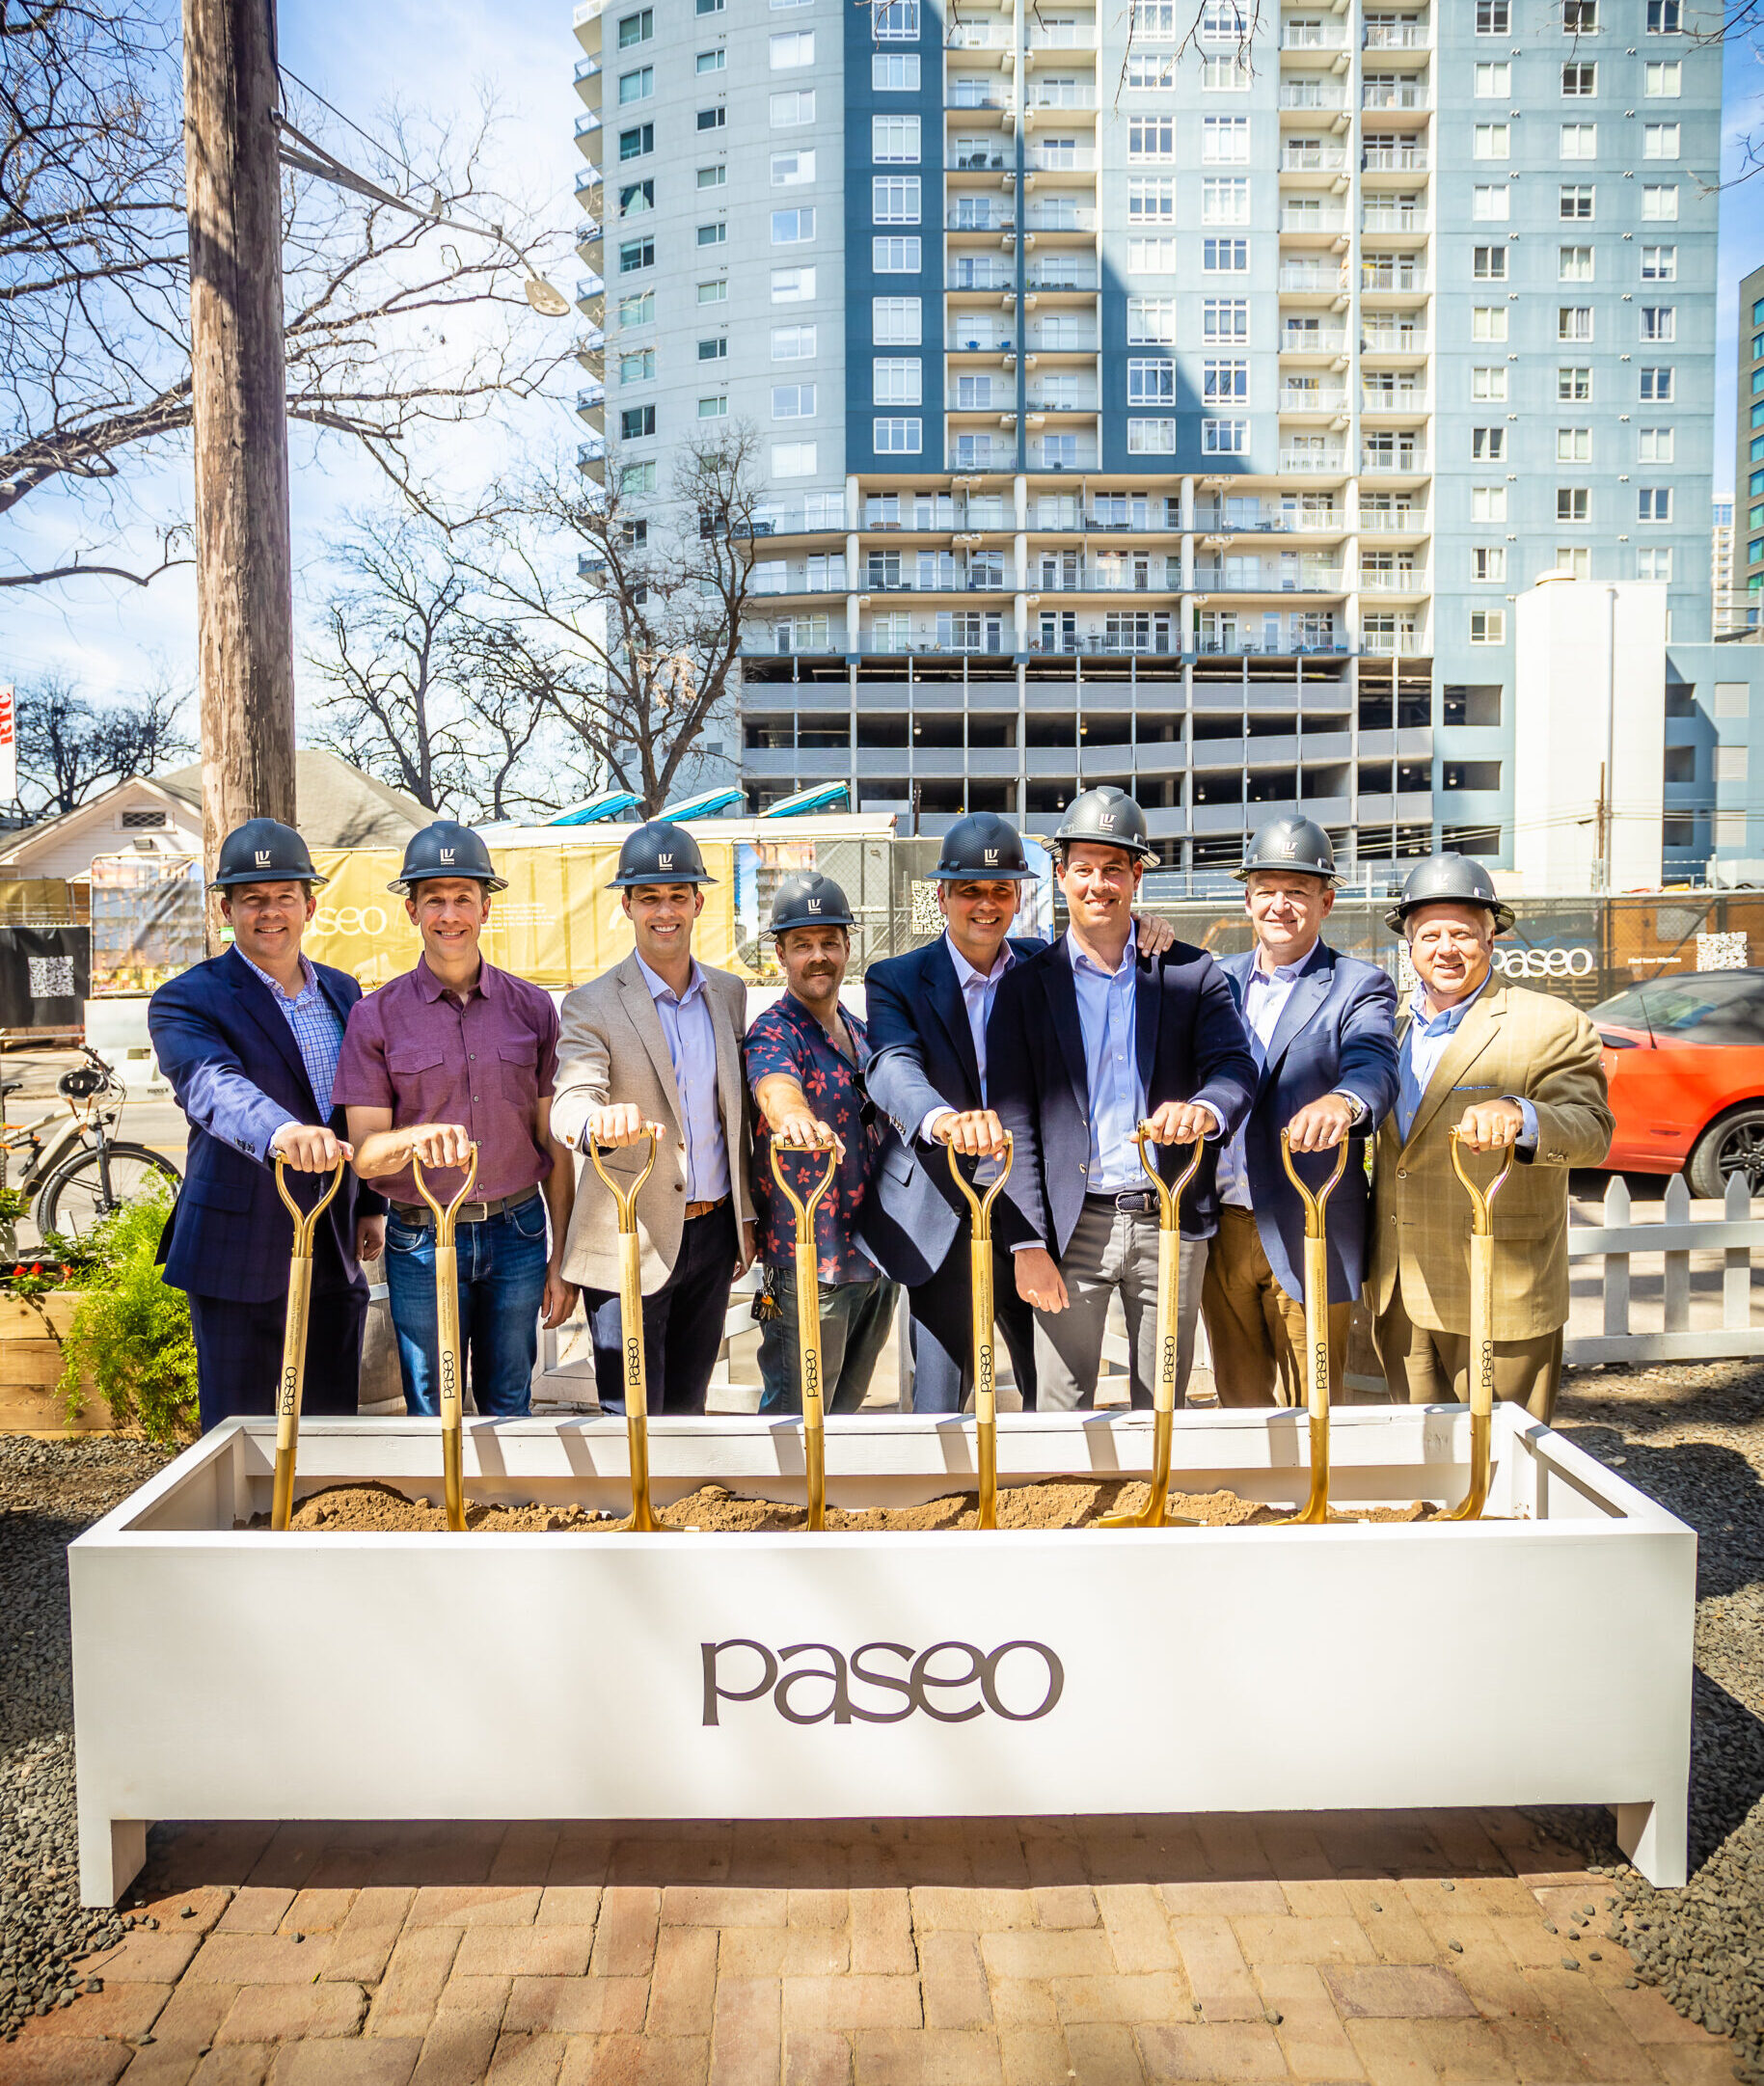 Project partners celebrate Paseo at 80 Rainey